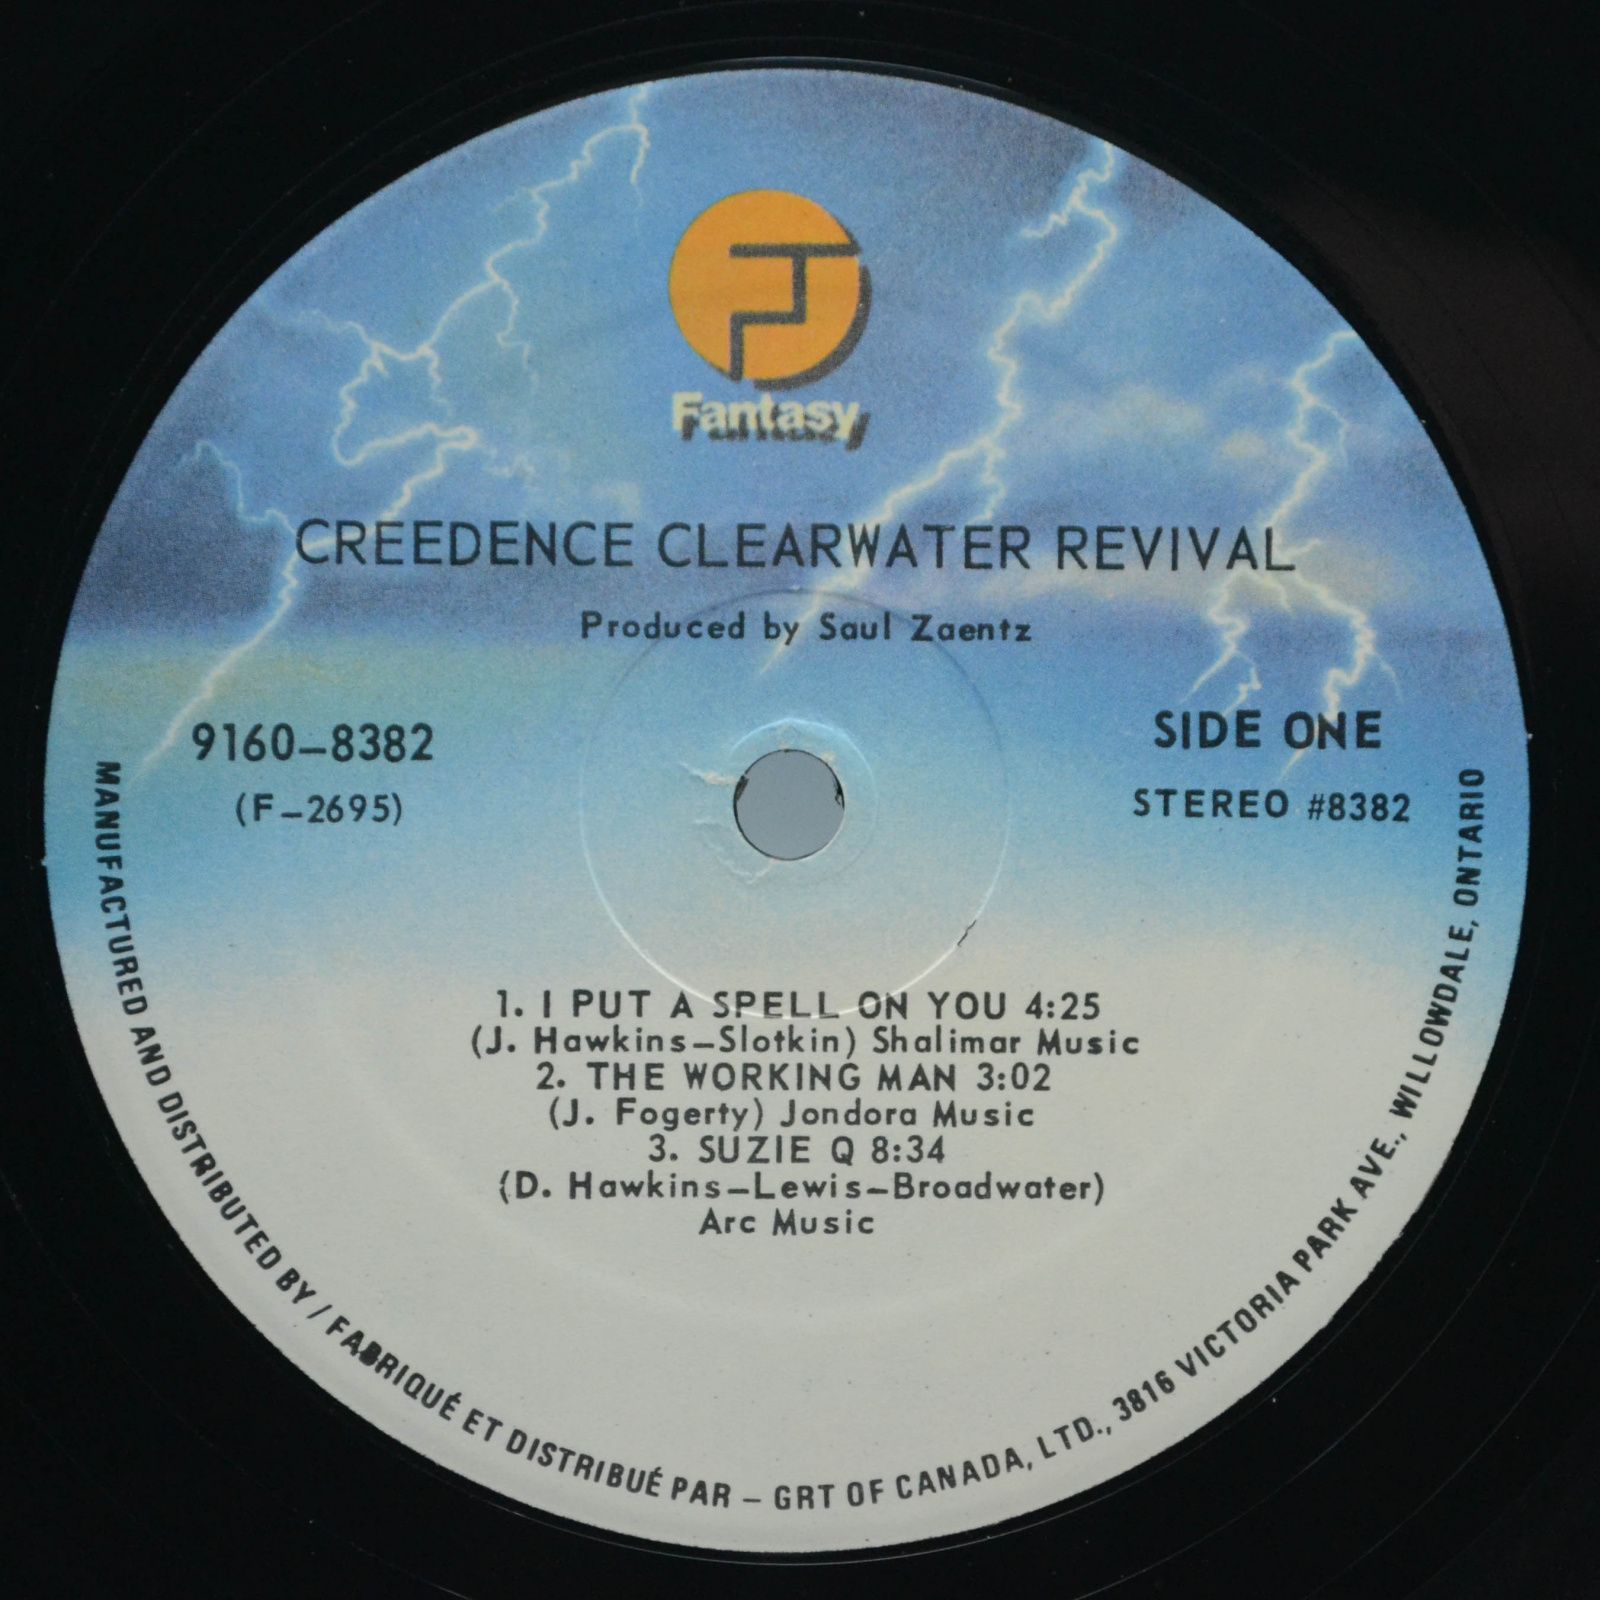 Creedence Clearwater Revival — Creedence Clearwater Revival, 1968